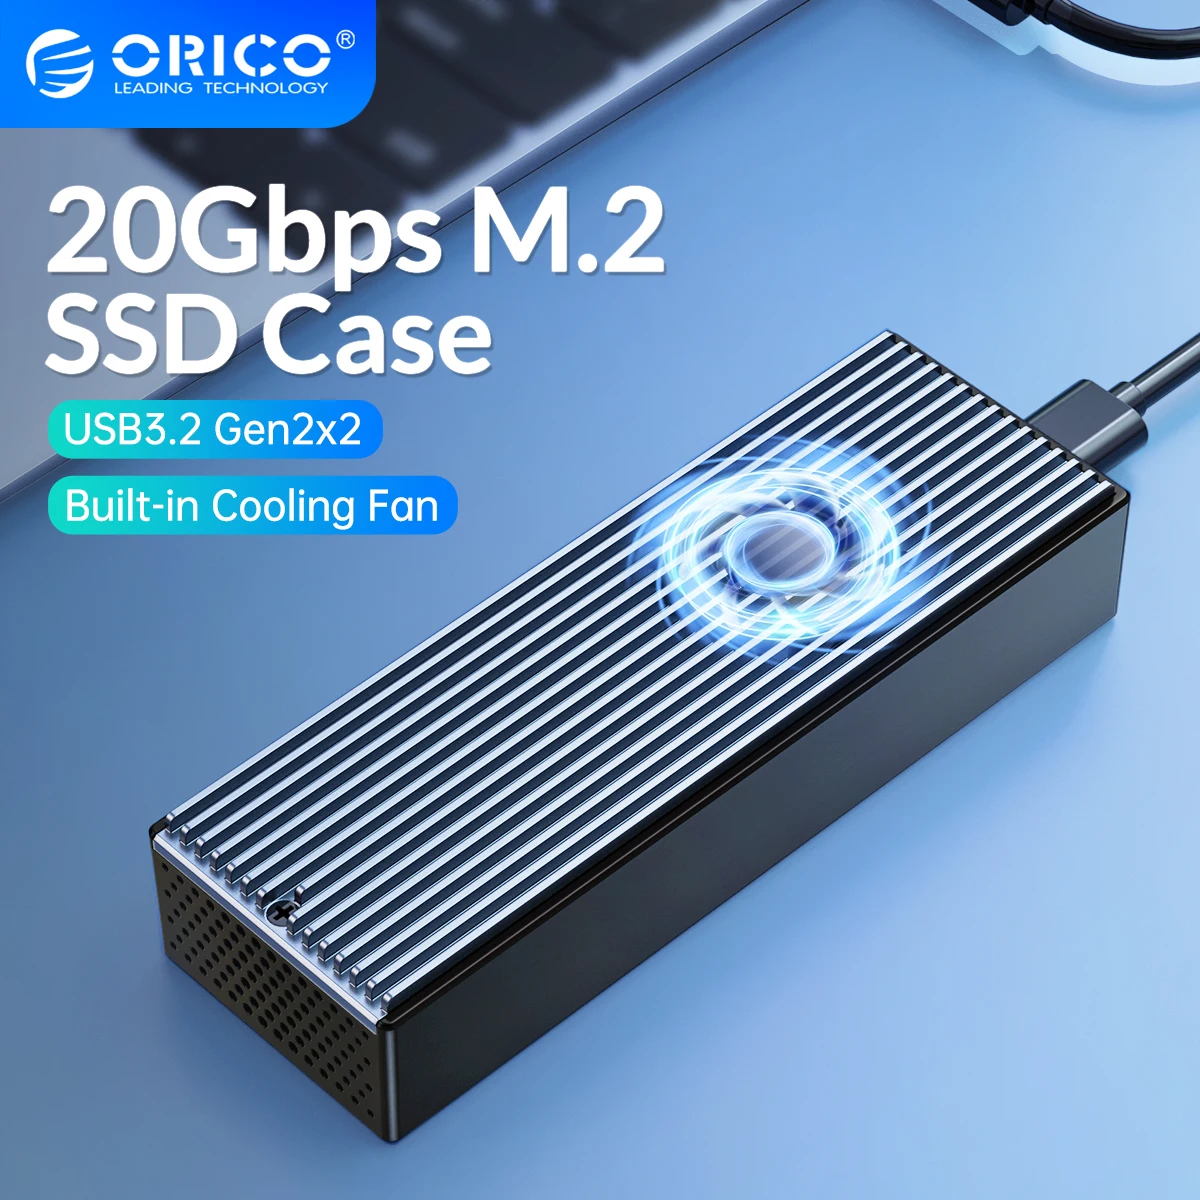 

ORICO LSDT 20Gbps M.2 NVME SSD Case with Built-in Cooling Fan For M.2 NVME 2230 2242 2260 2280 SSD Type-C M2 NVME SSD Enclosure